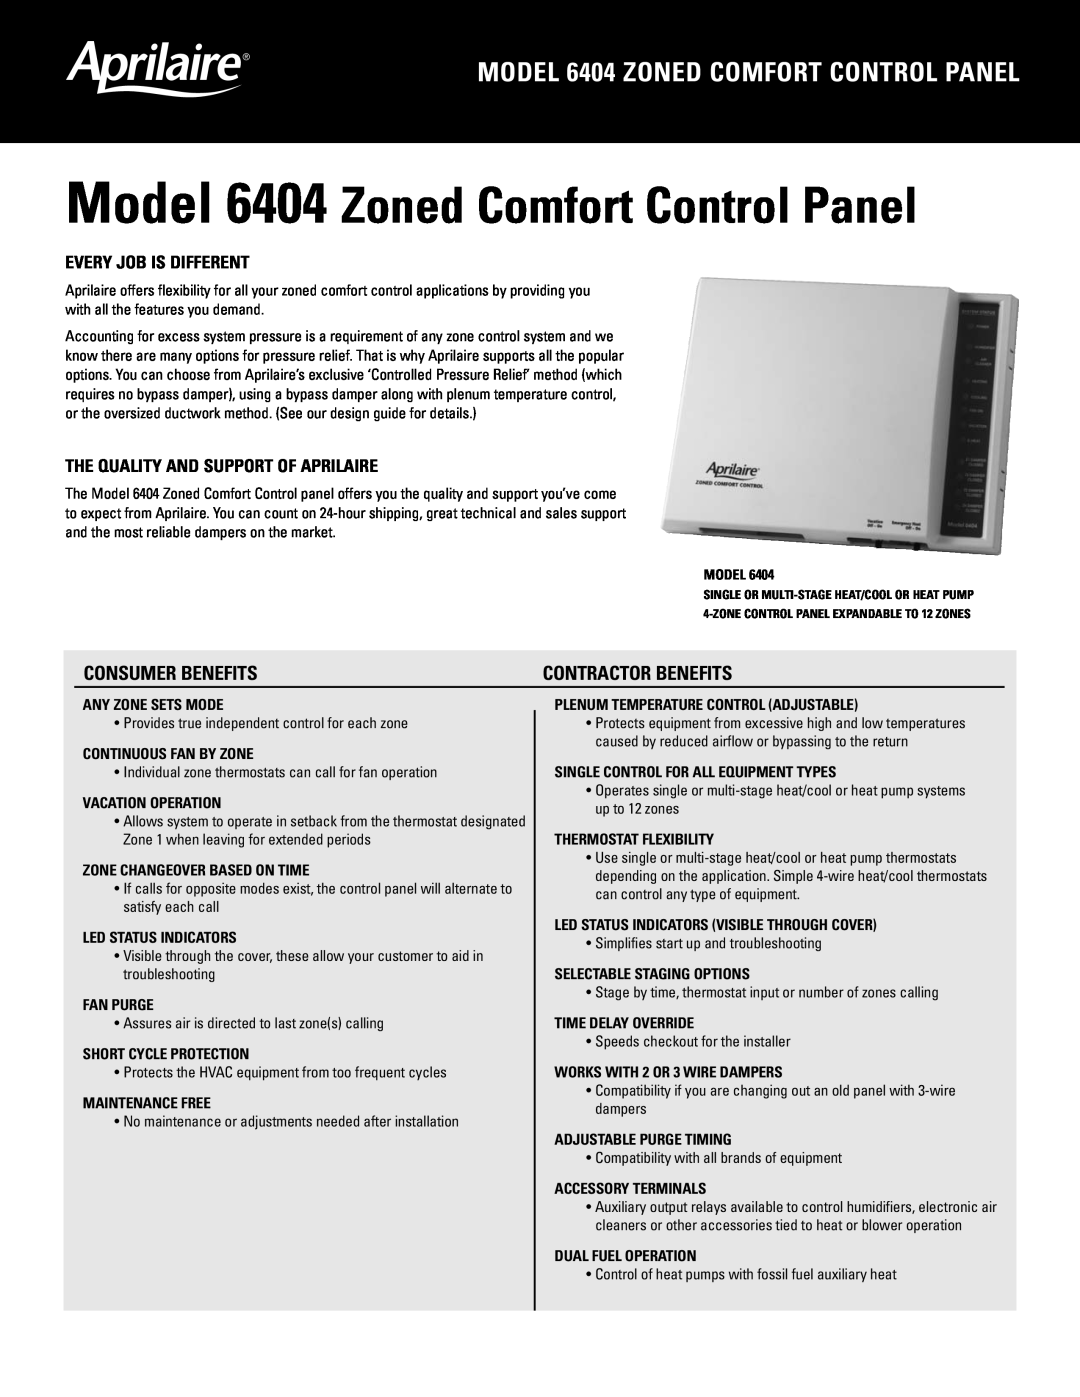 Aprilaire manual Every Job Is Different, The Quality And Support Of Aprilaire, Model 6404 Zoned Comfort Control Panel 